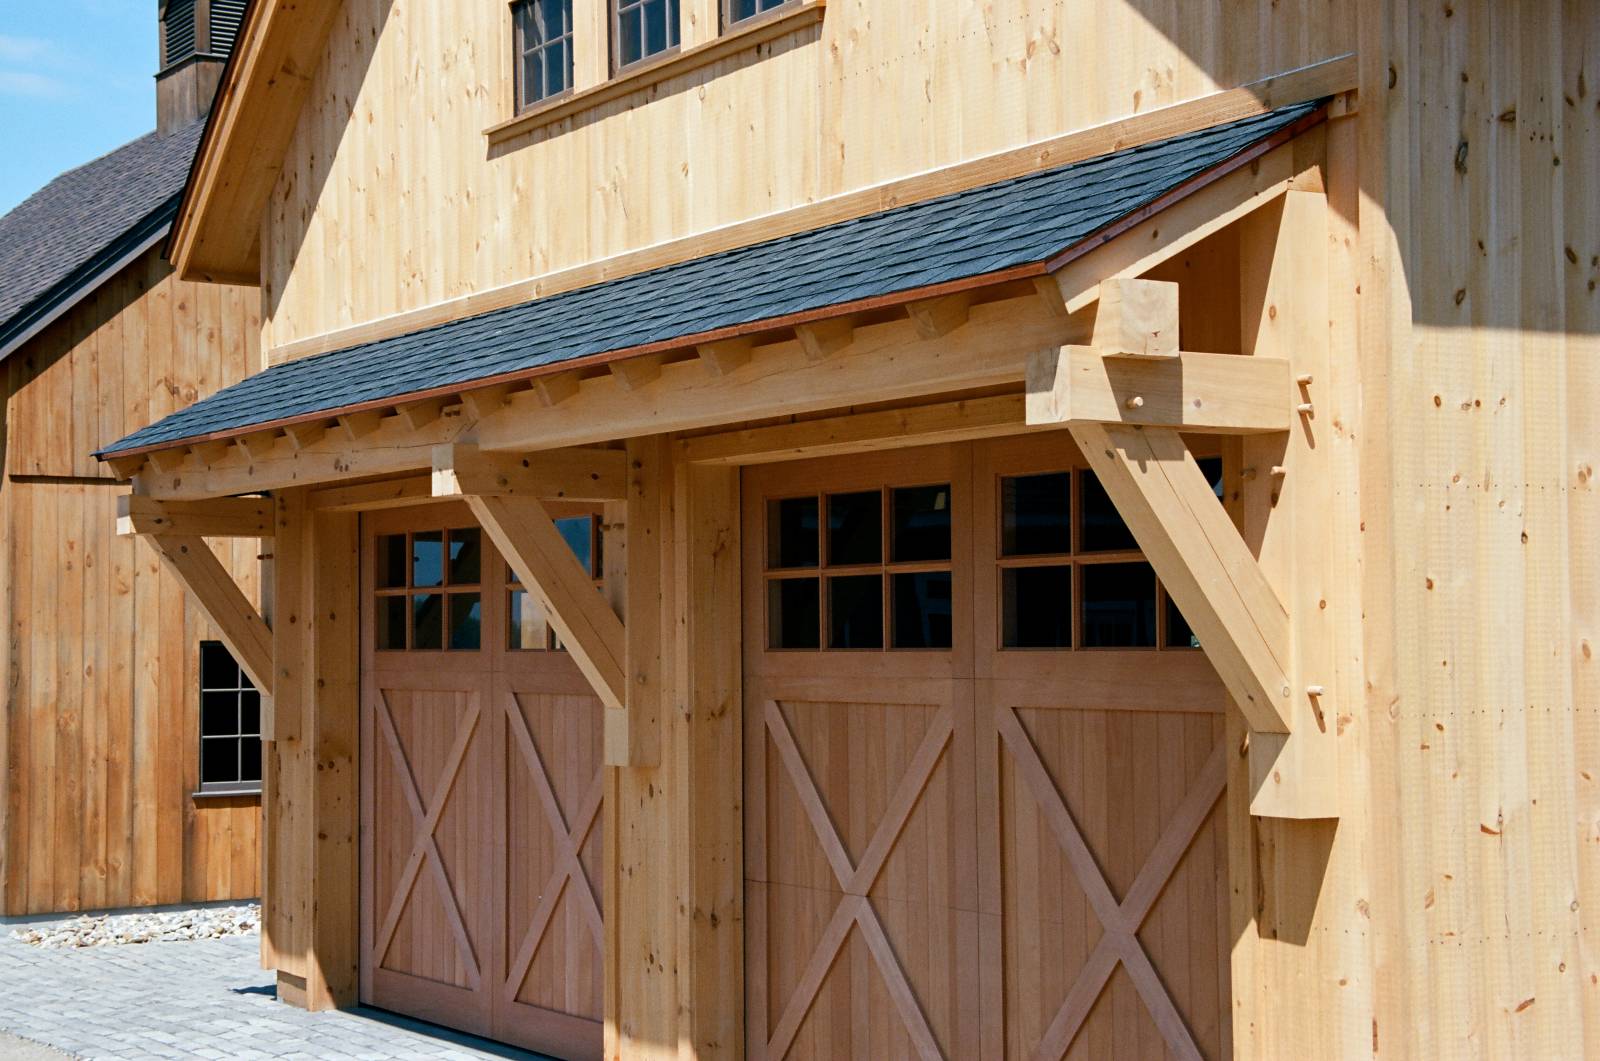 24' Big Sky Timber Frame Eyebrow Roof over the Spanish Cedar overhead doors with square glass